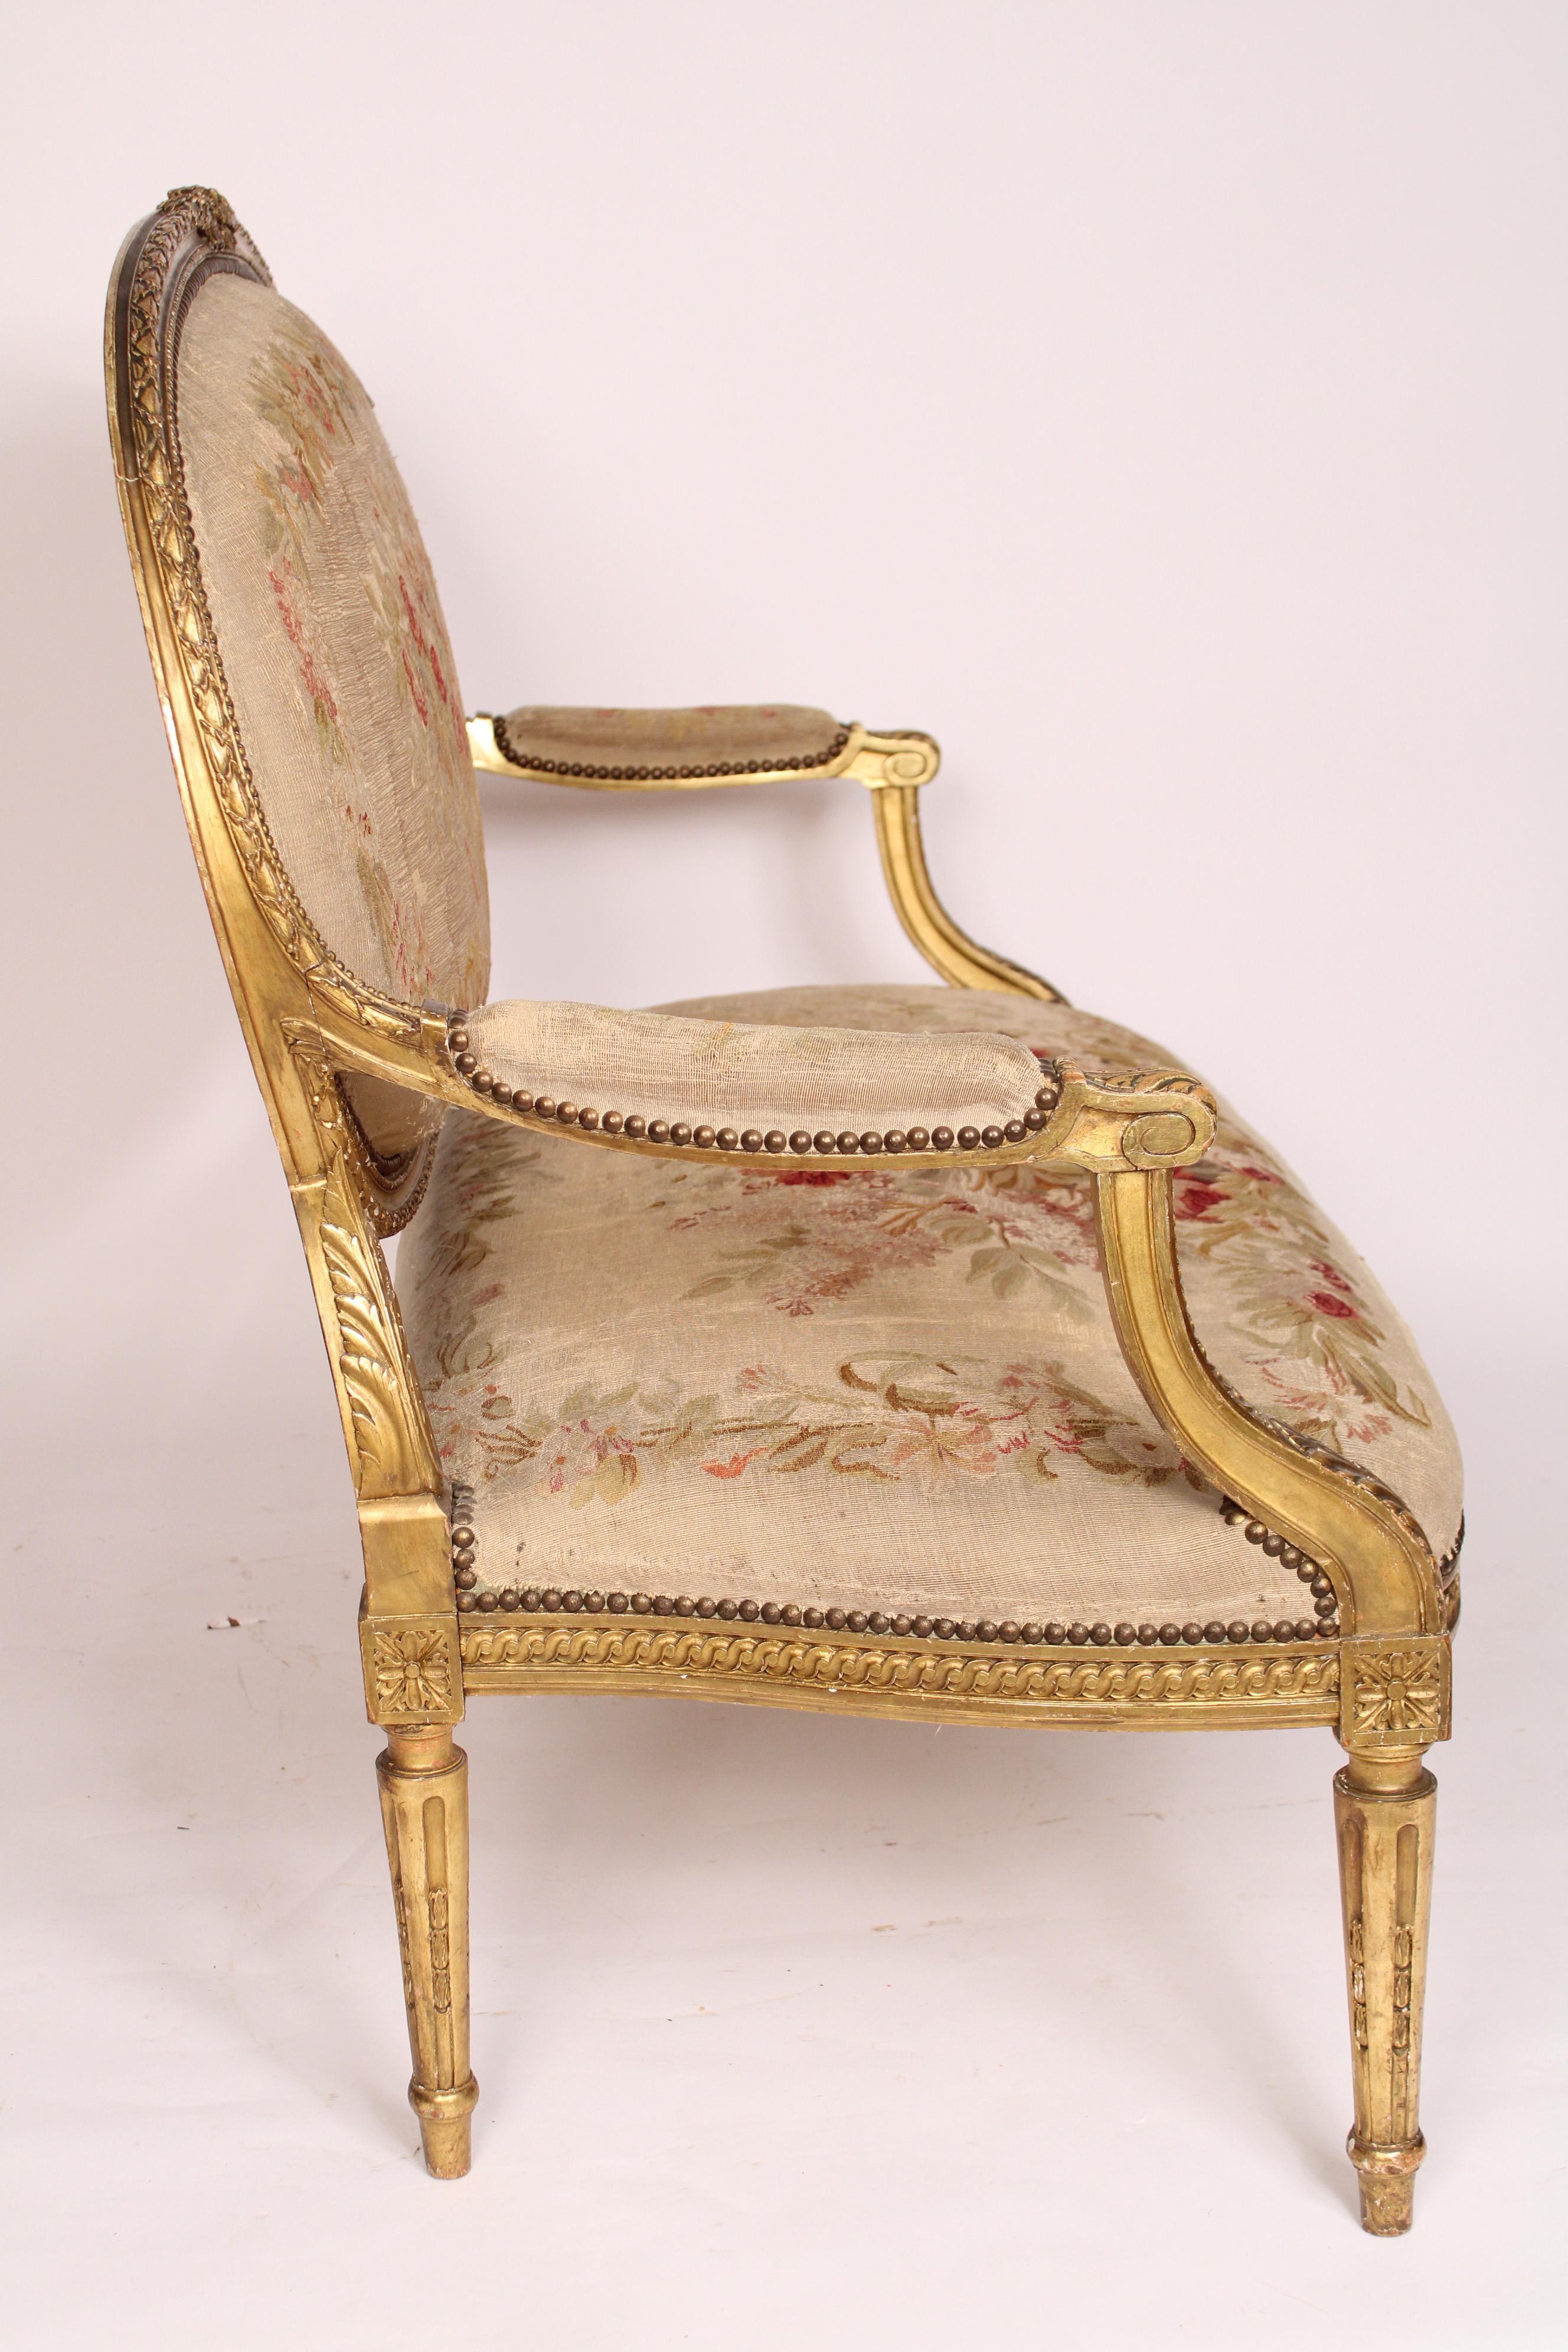 Antique Louis XVI Style Gilt Wood Settee In Good Condition For Sale In Laguna Beach, CA